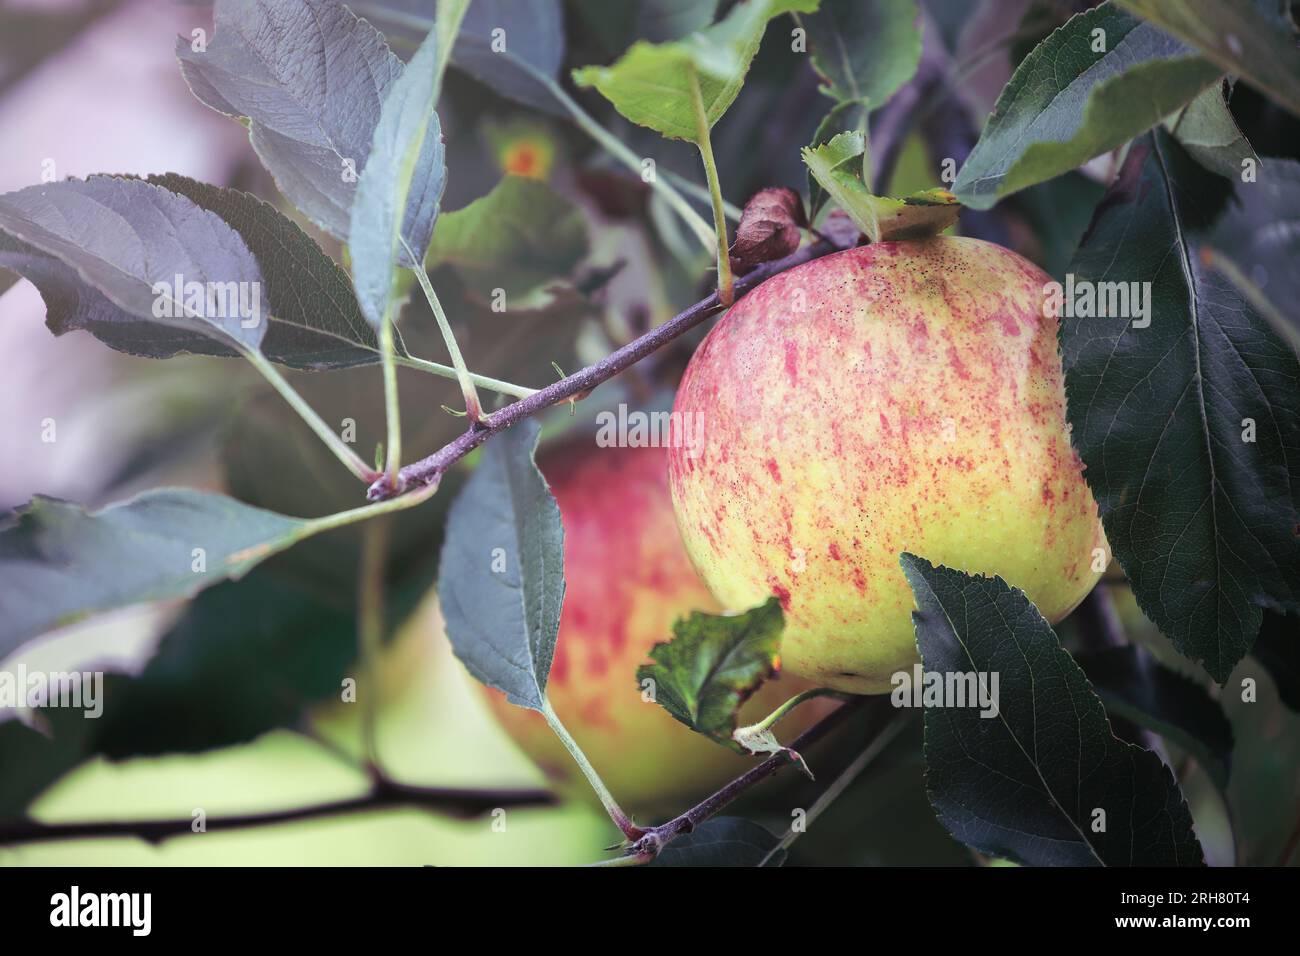 Selective focus of a Gala apples growing on the branches of an apple tree in a home orchard. Blurred foreground and background. Stock Photo